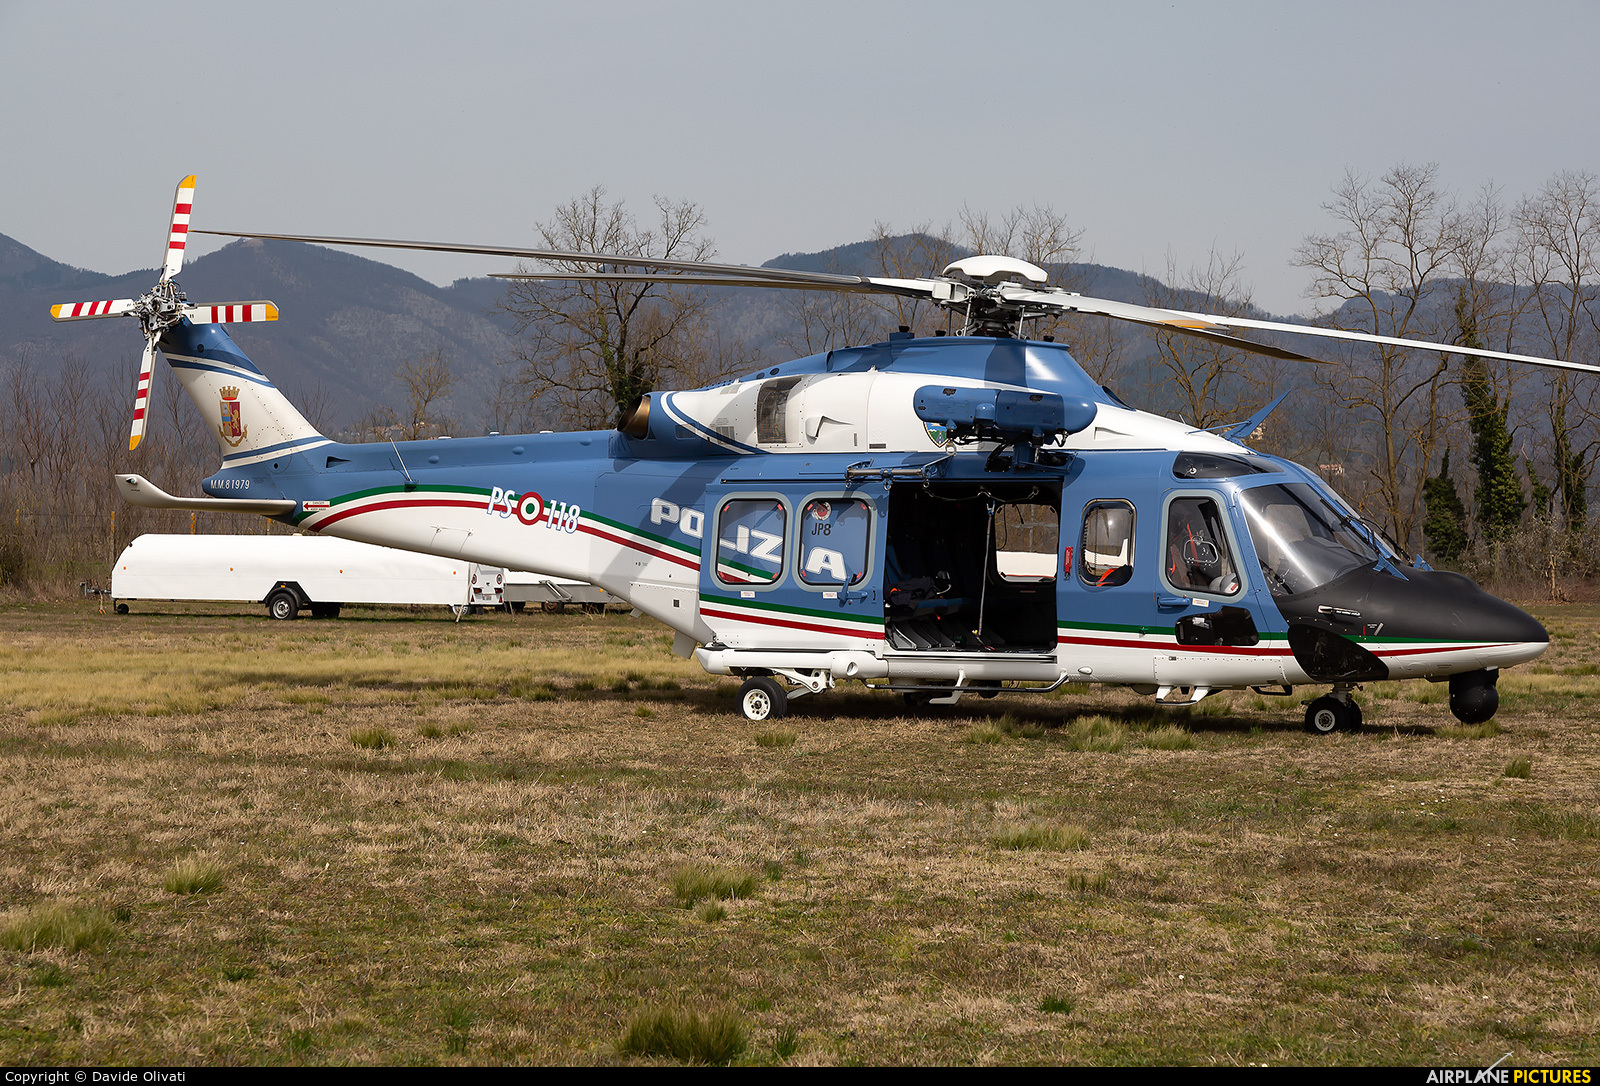 Italy - Police MM81979 aircraft at Off Airport - Italy